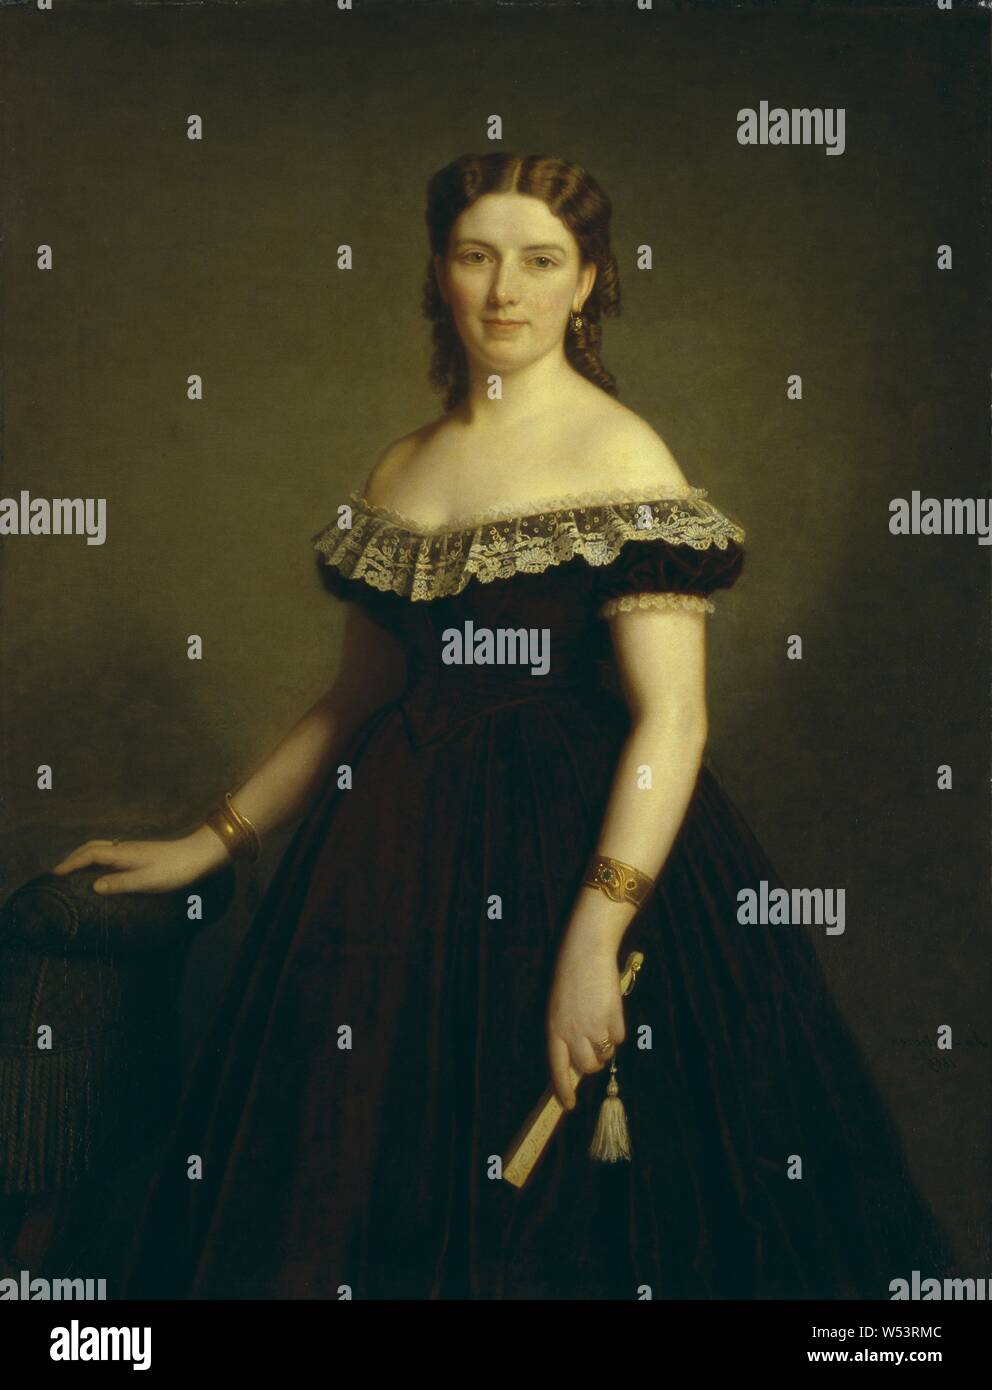 Amalia Lindegren, Jane Cederlund, painting, 1869, oil on canvas, Height, 129.5 cm (50.9 inches), Width, 99 cm (38.9 inches), Signed, Am, Lindegren 1869. Stock Photo